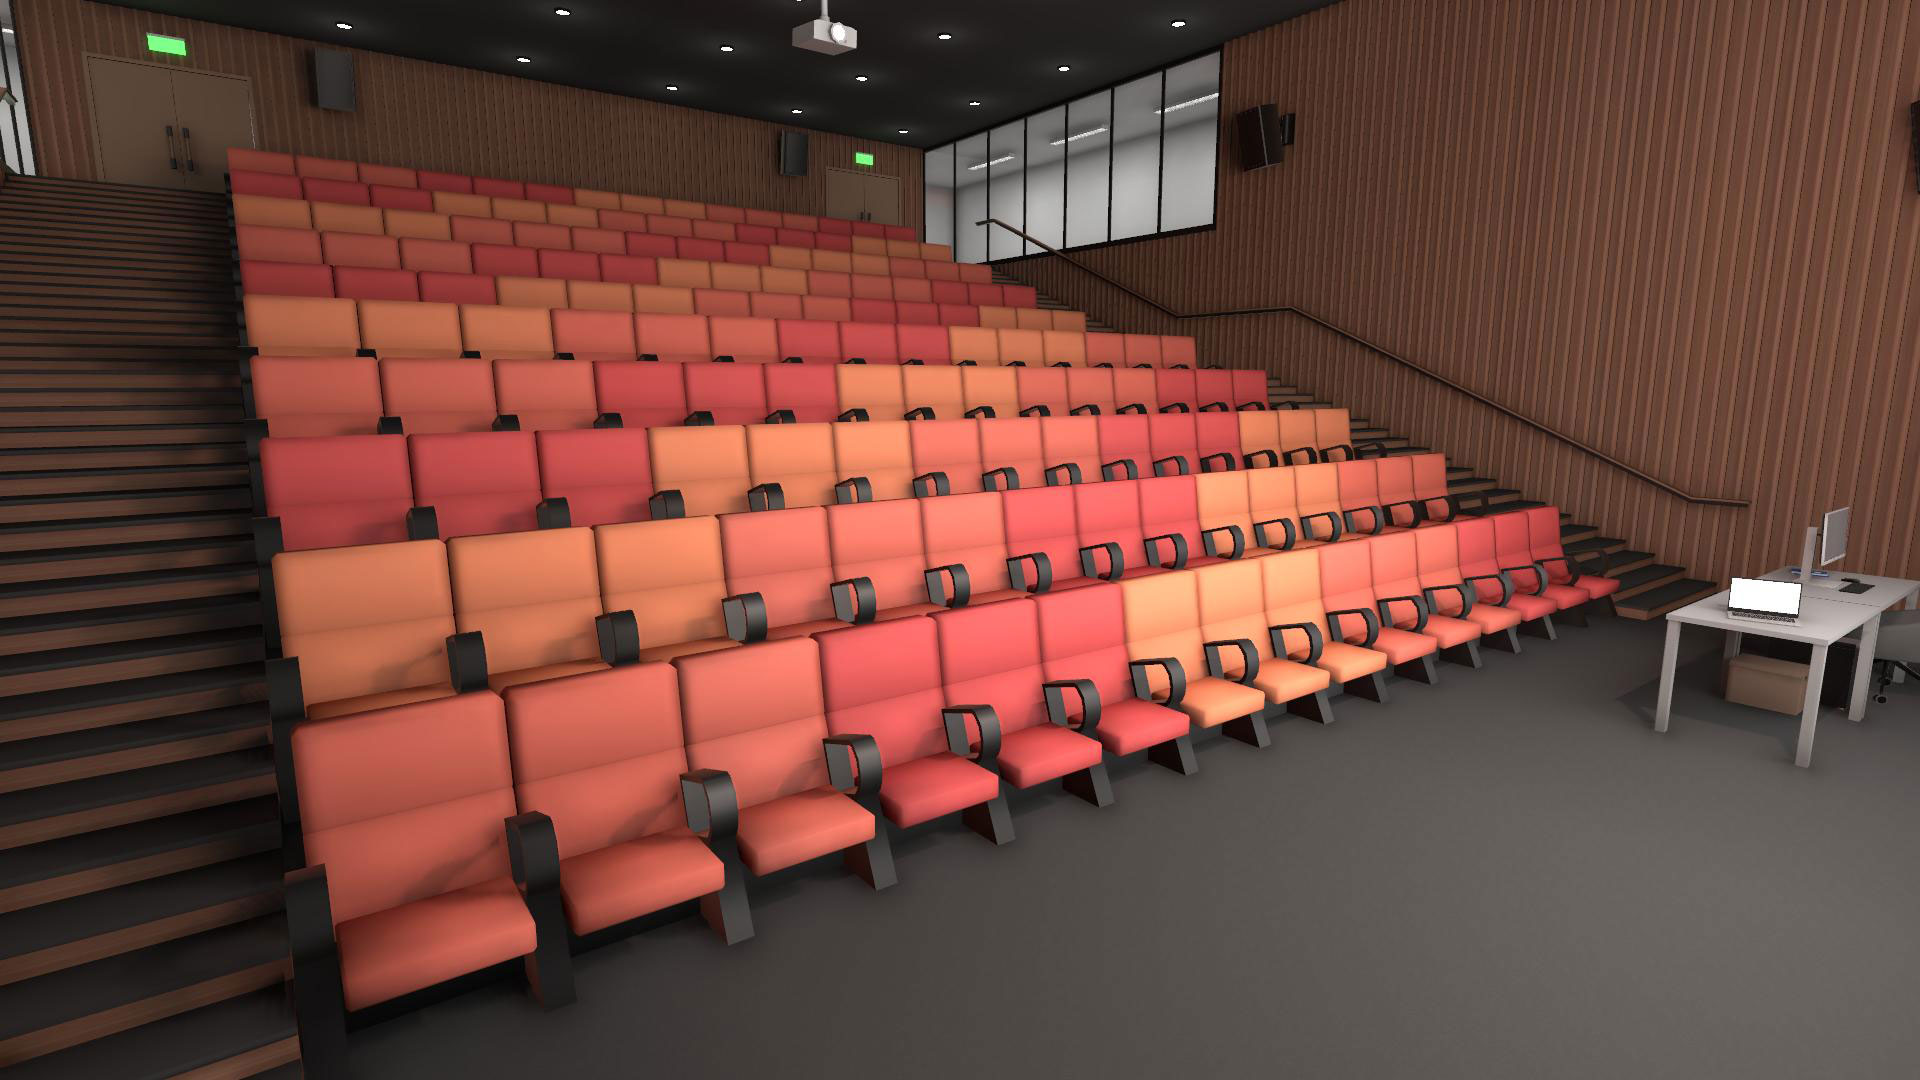 A 3D model of an auditorium, made for VR.